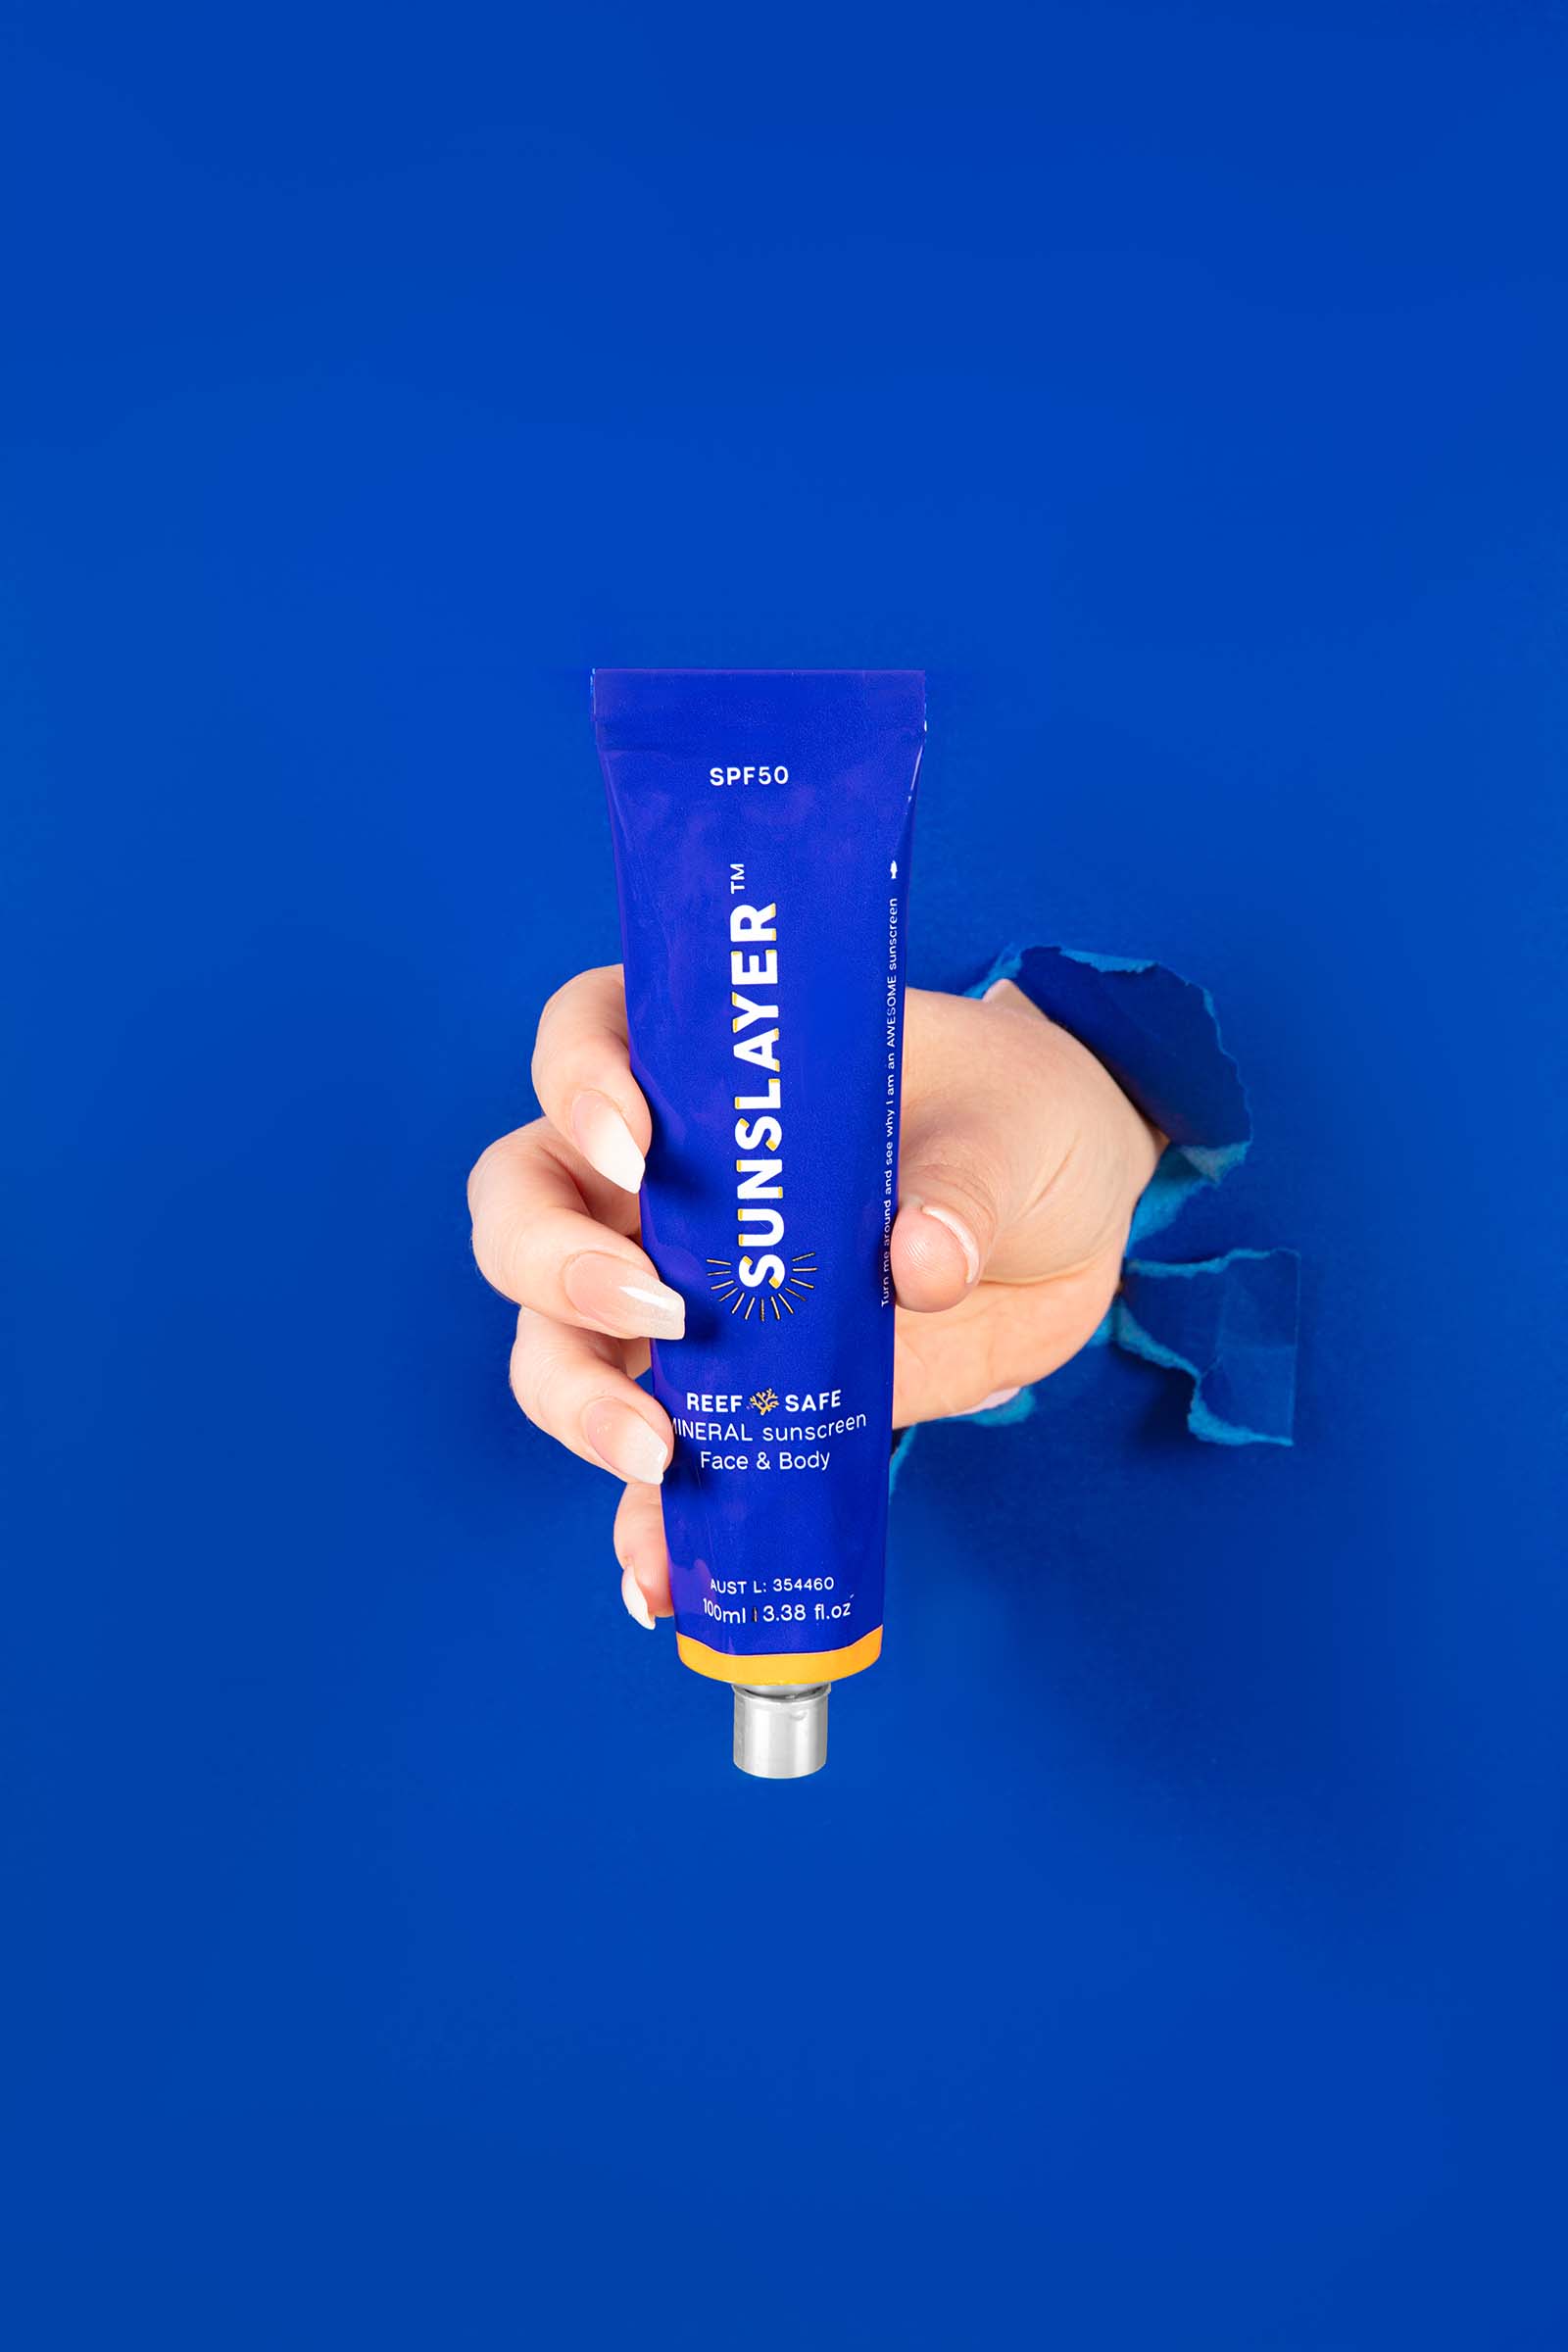 Bold Product Photos for a Sunscreen Brand. Hand product photography by Colourpop Studio